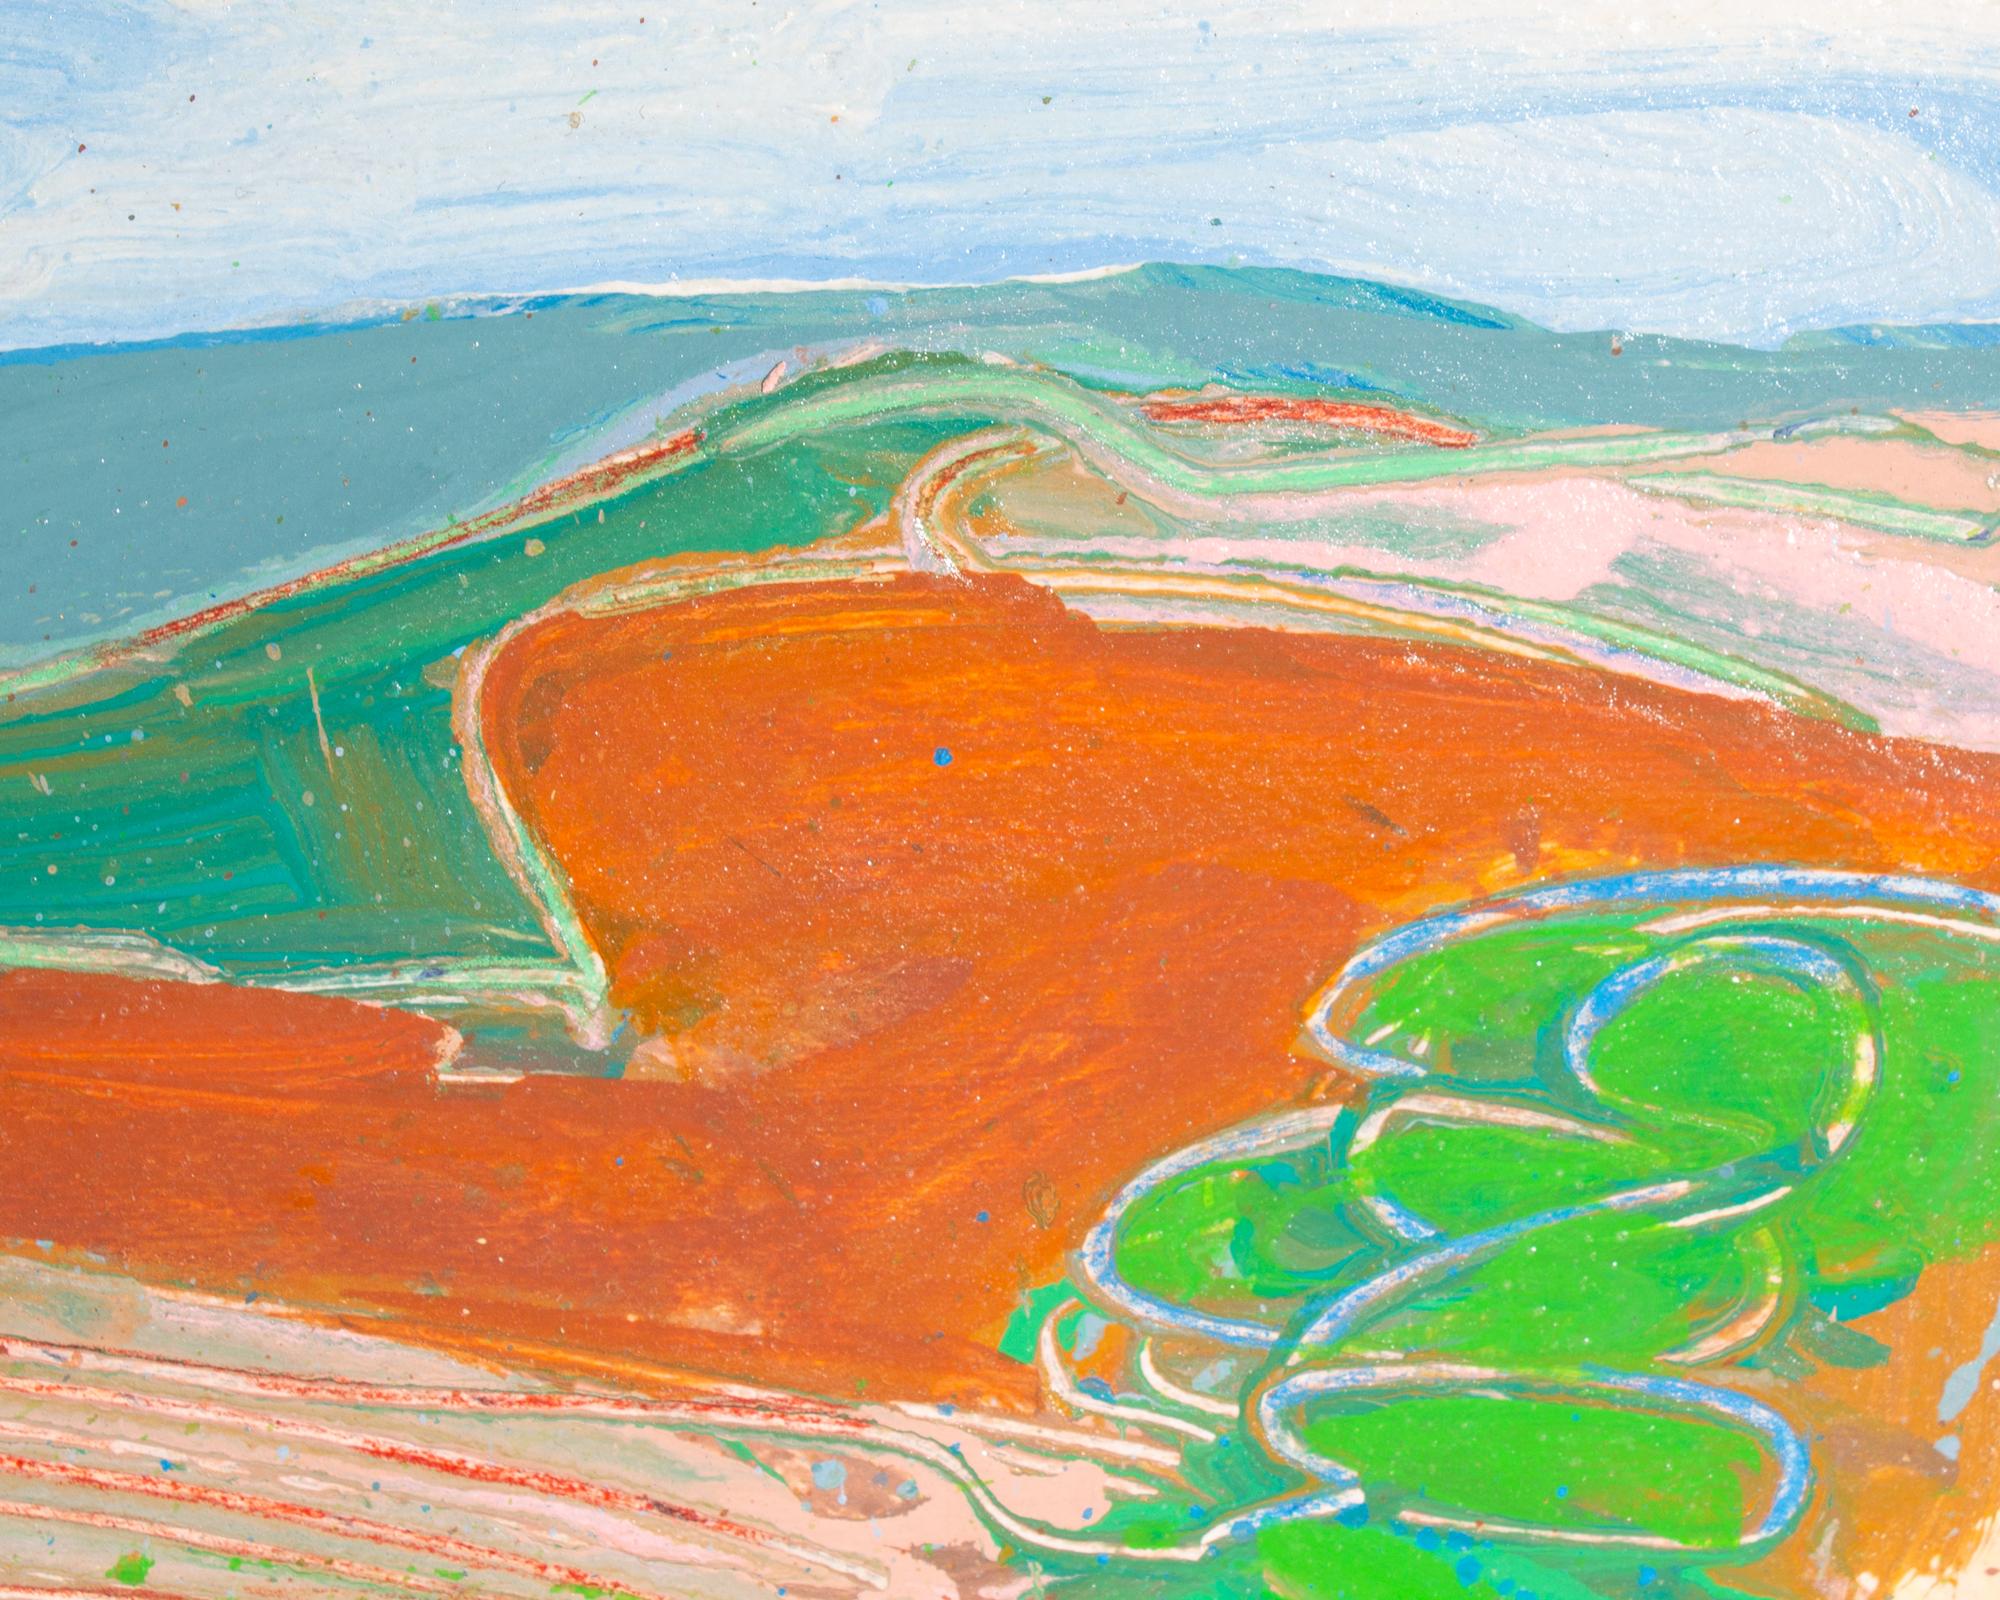 Hand-Painted Harry Hilson Signed 1986 “Distant Wind” Acrylic on Paper Landscape Painting For Sale